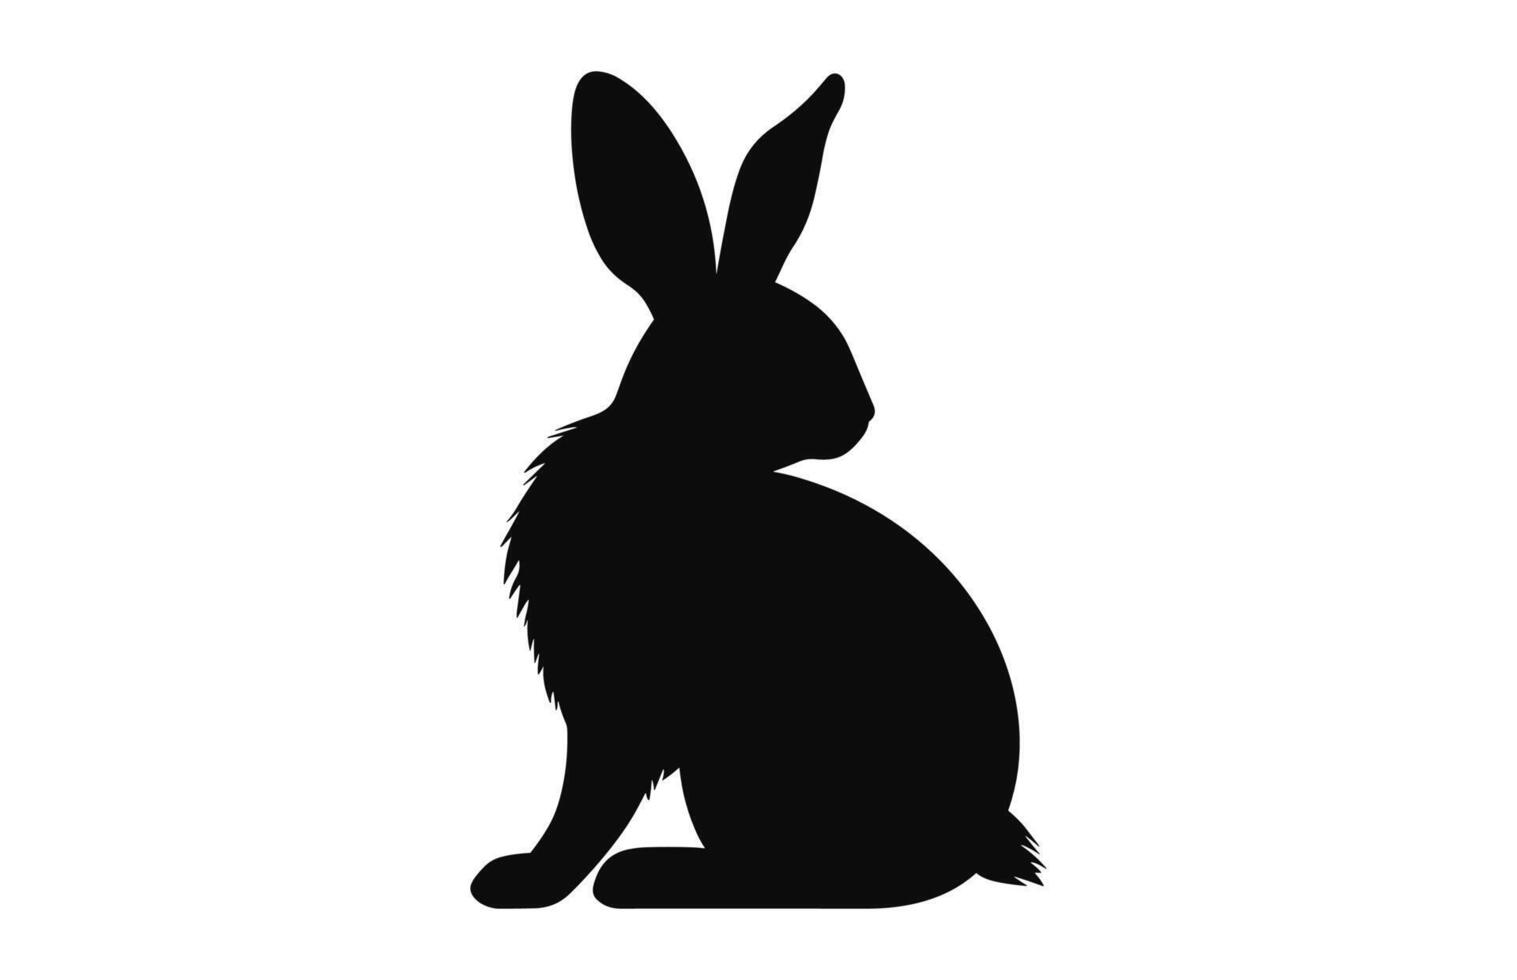 A Easter Bunny silhouette black vector